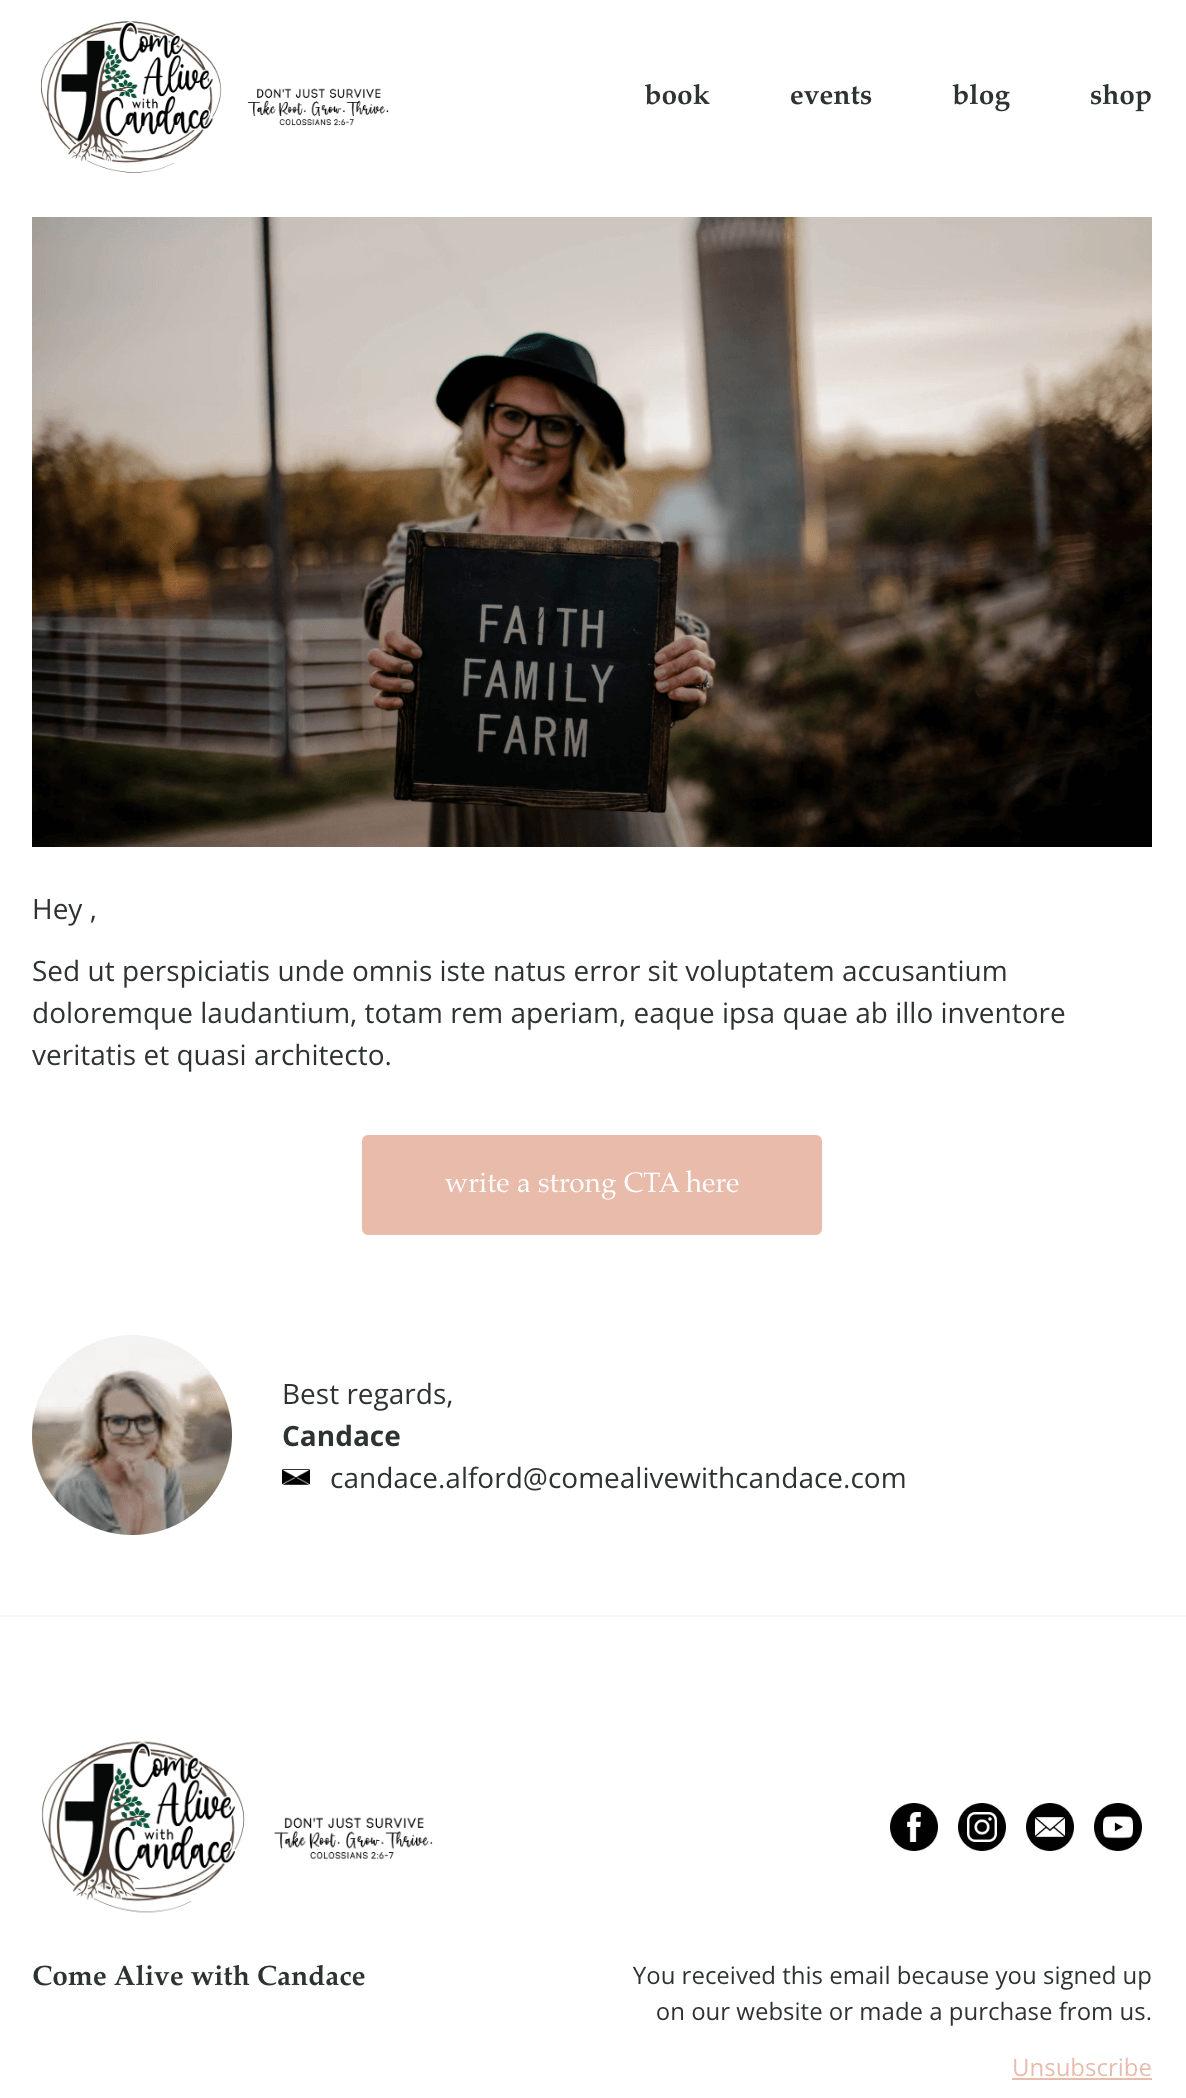 Come Alive with Candace - Email Template